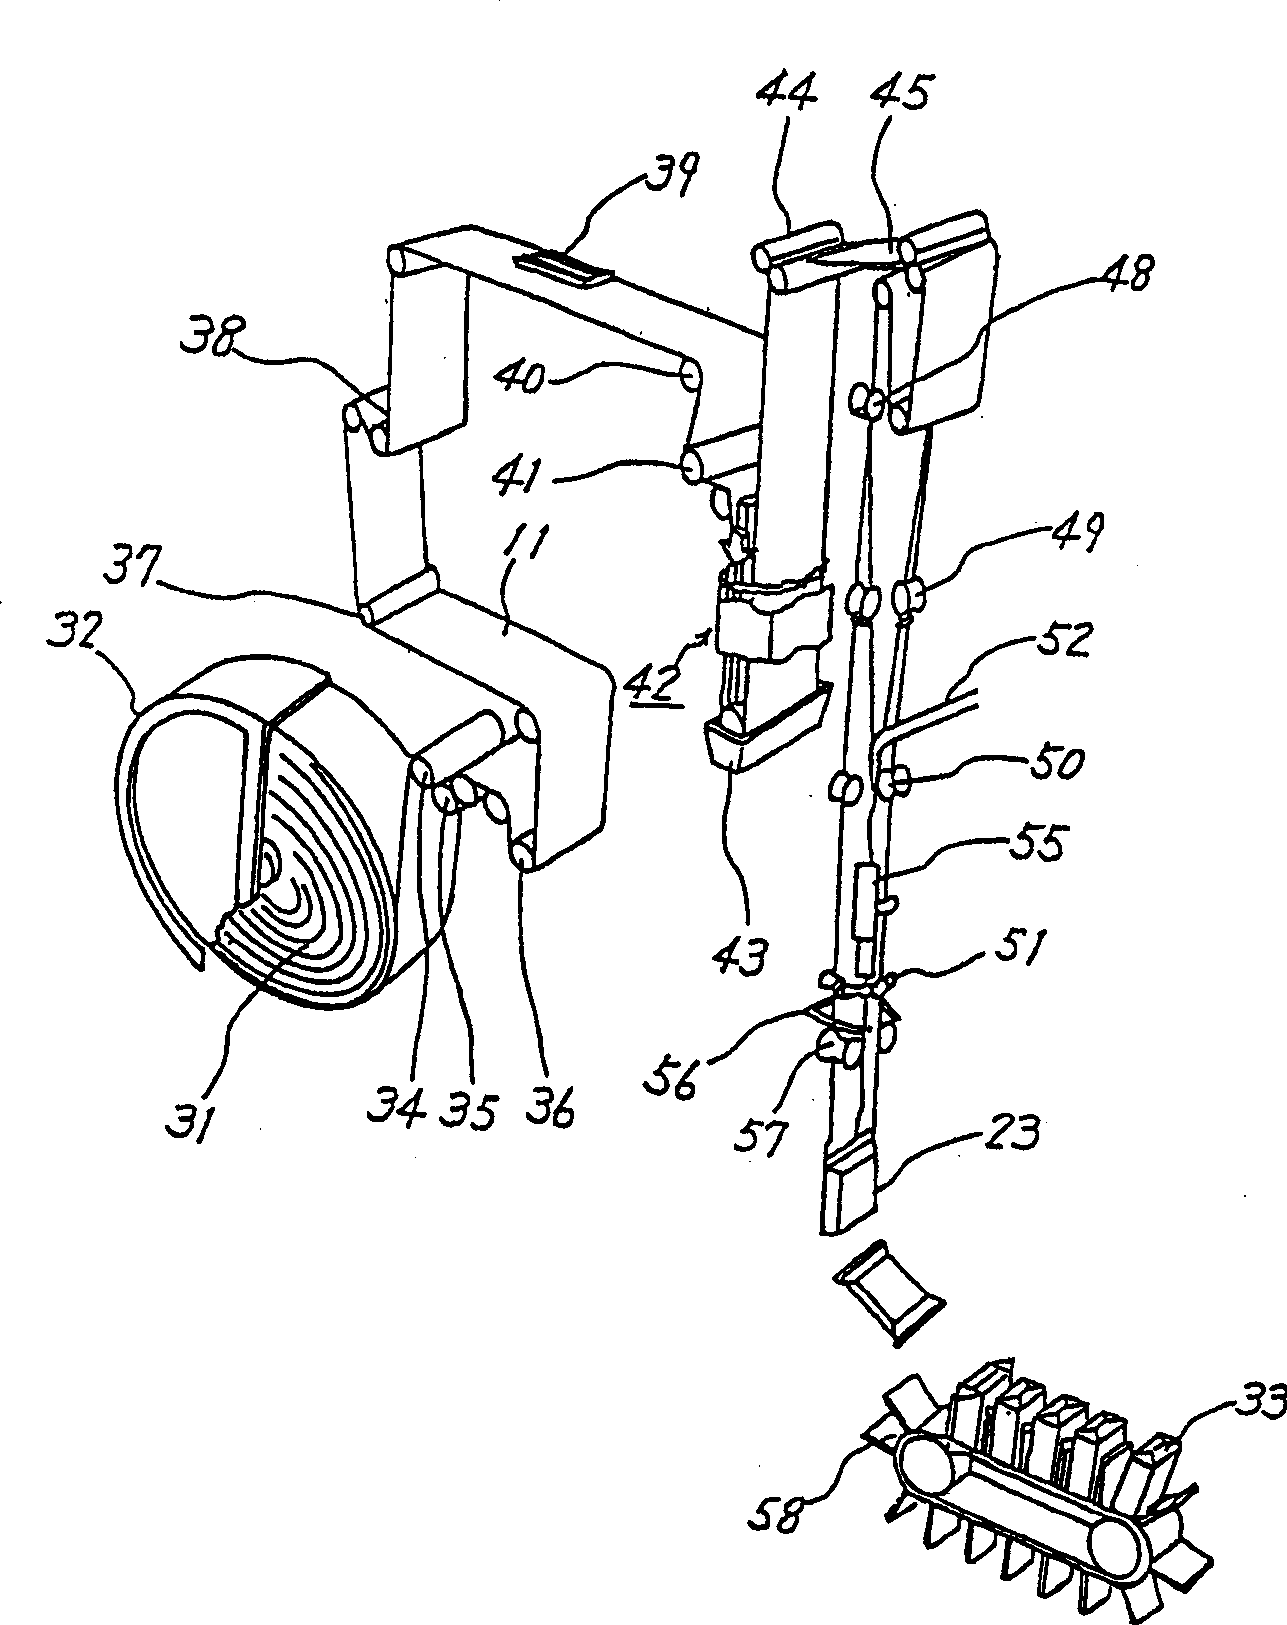 Filling machine provided with flushing device